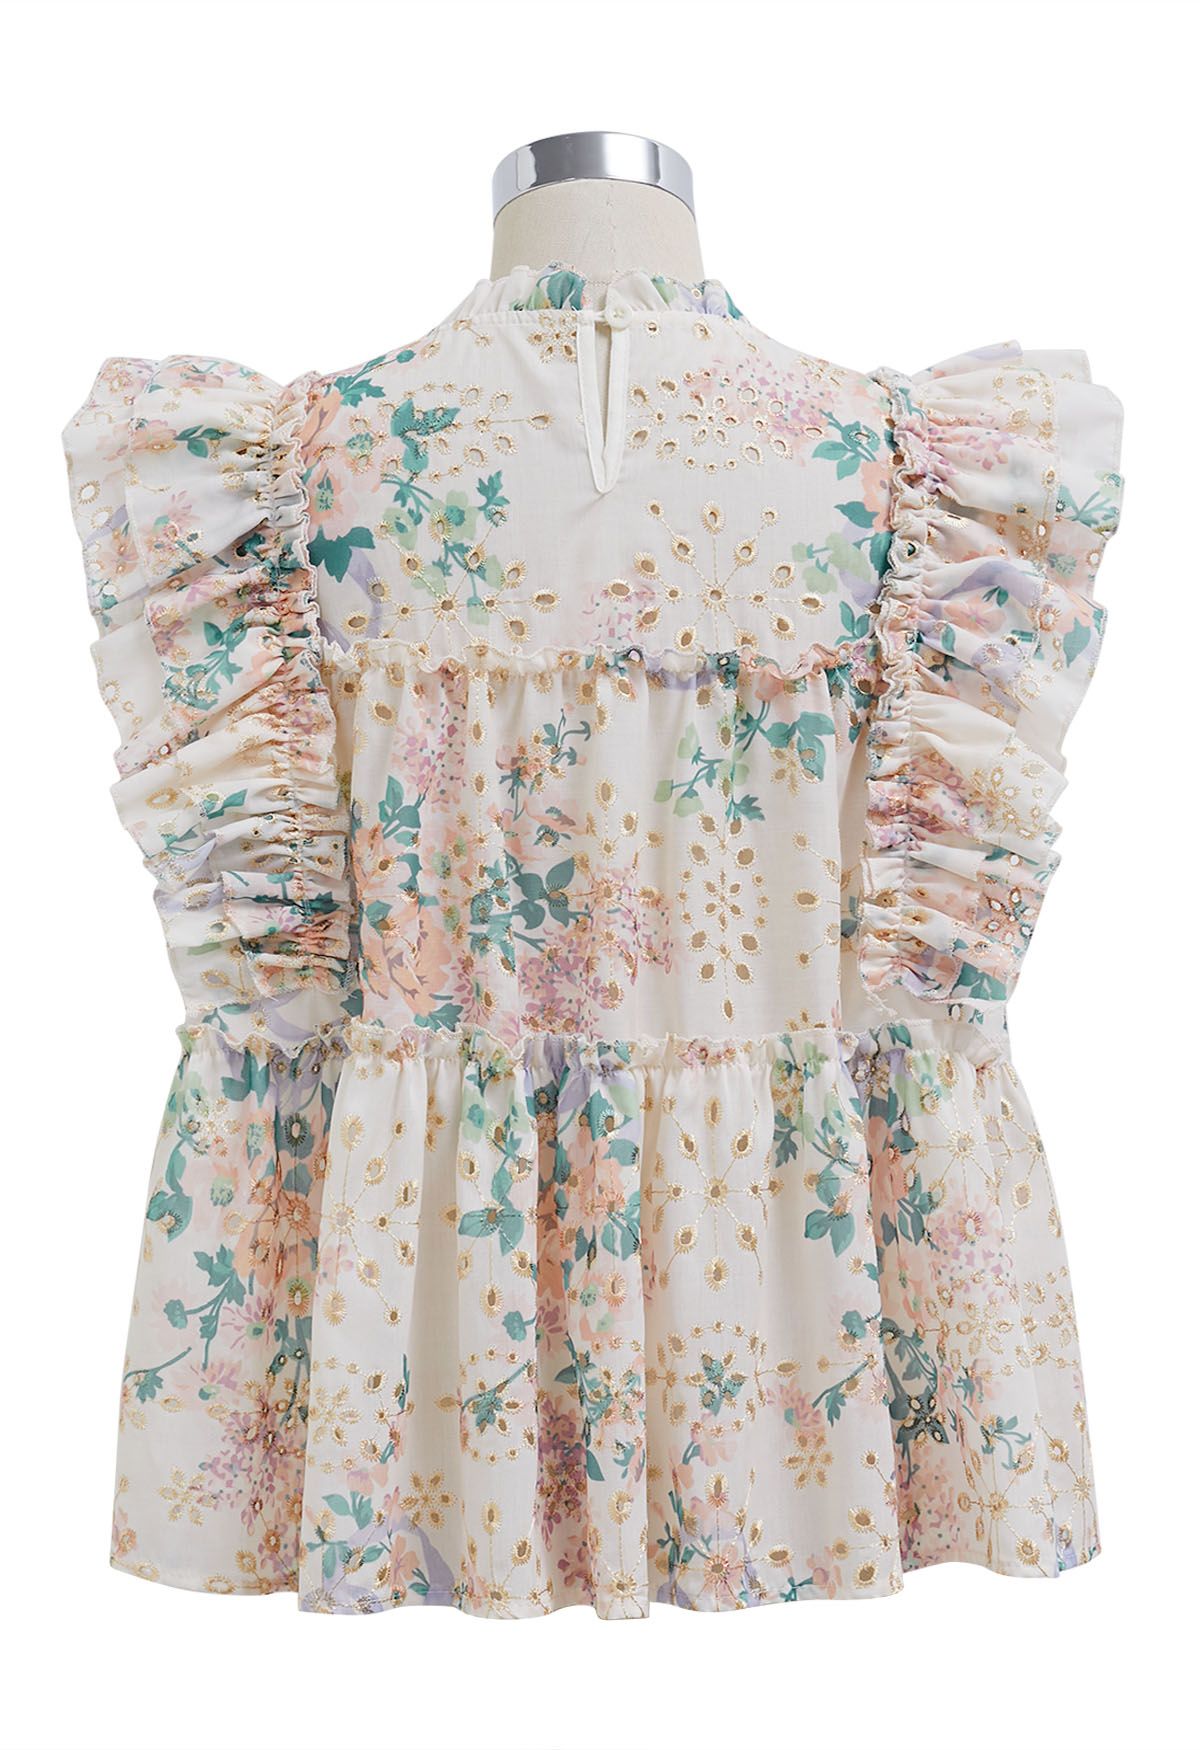 Matellic Embroidered Floral Print Sleeveless Dolly Top